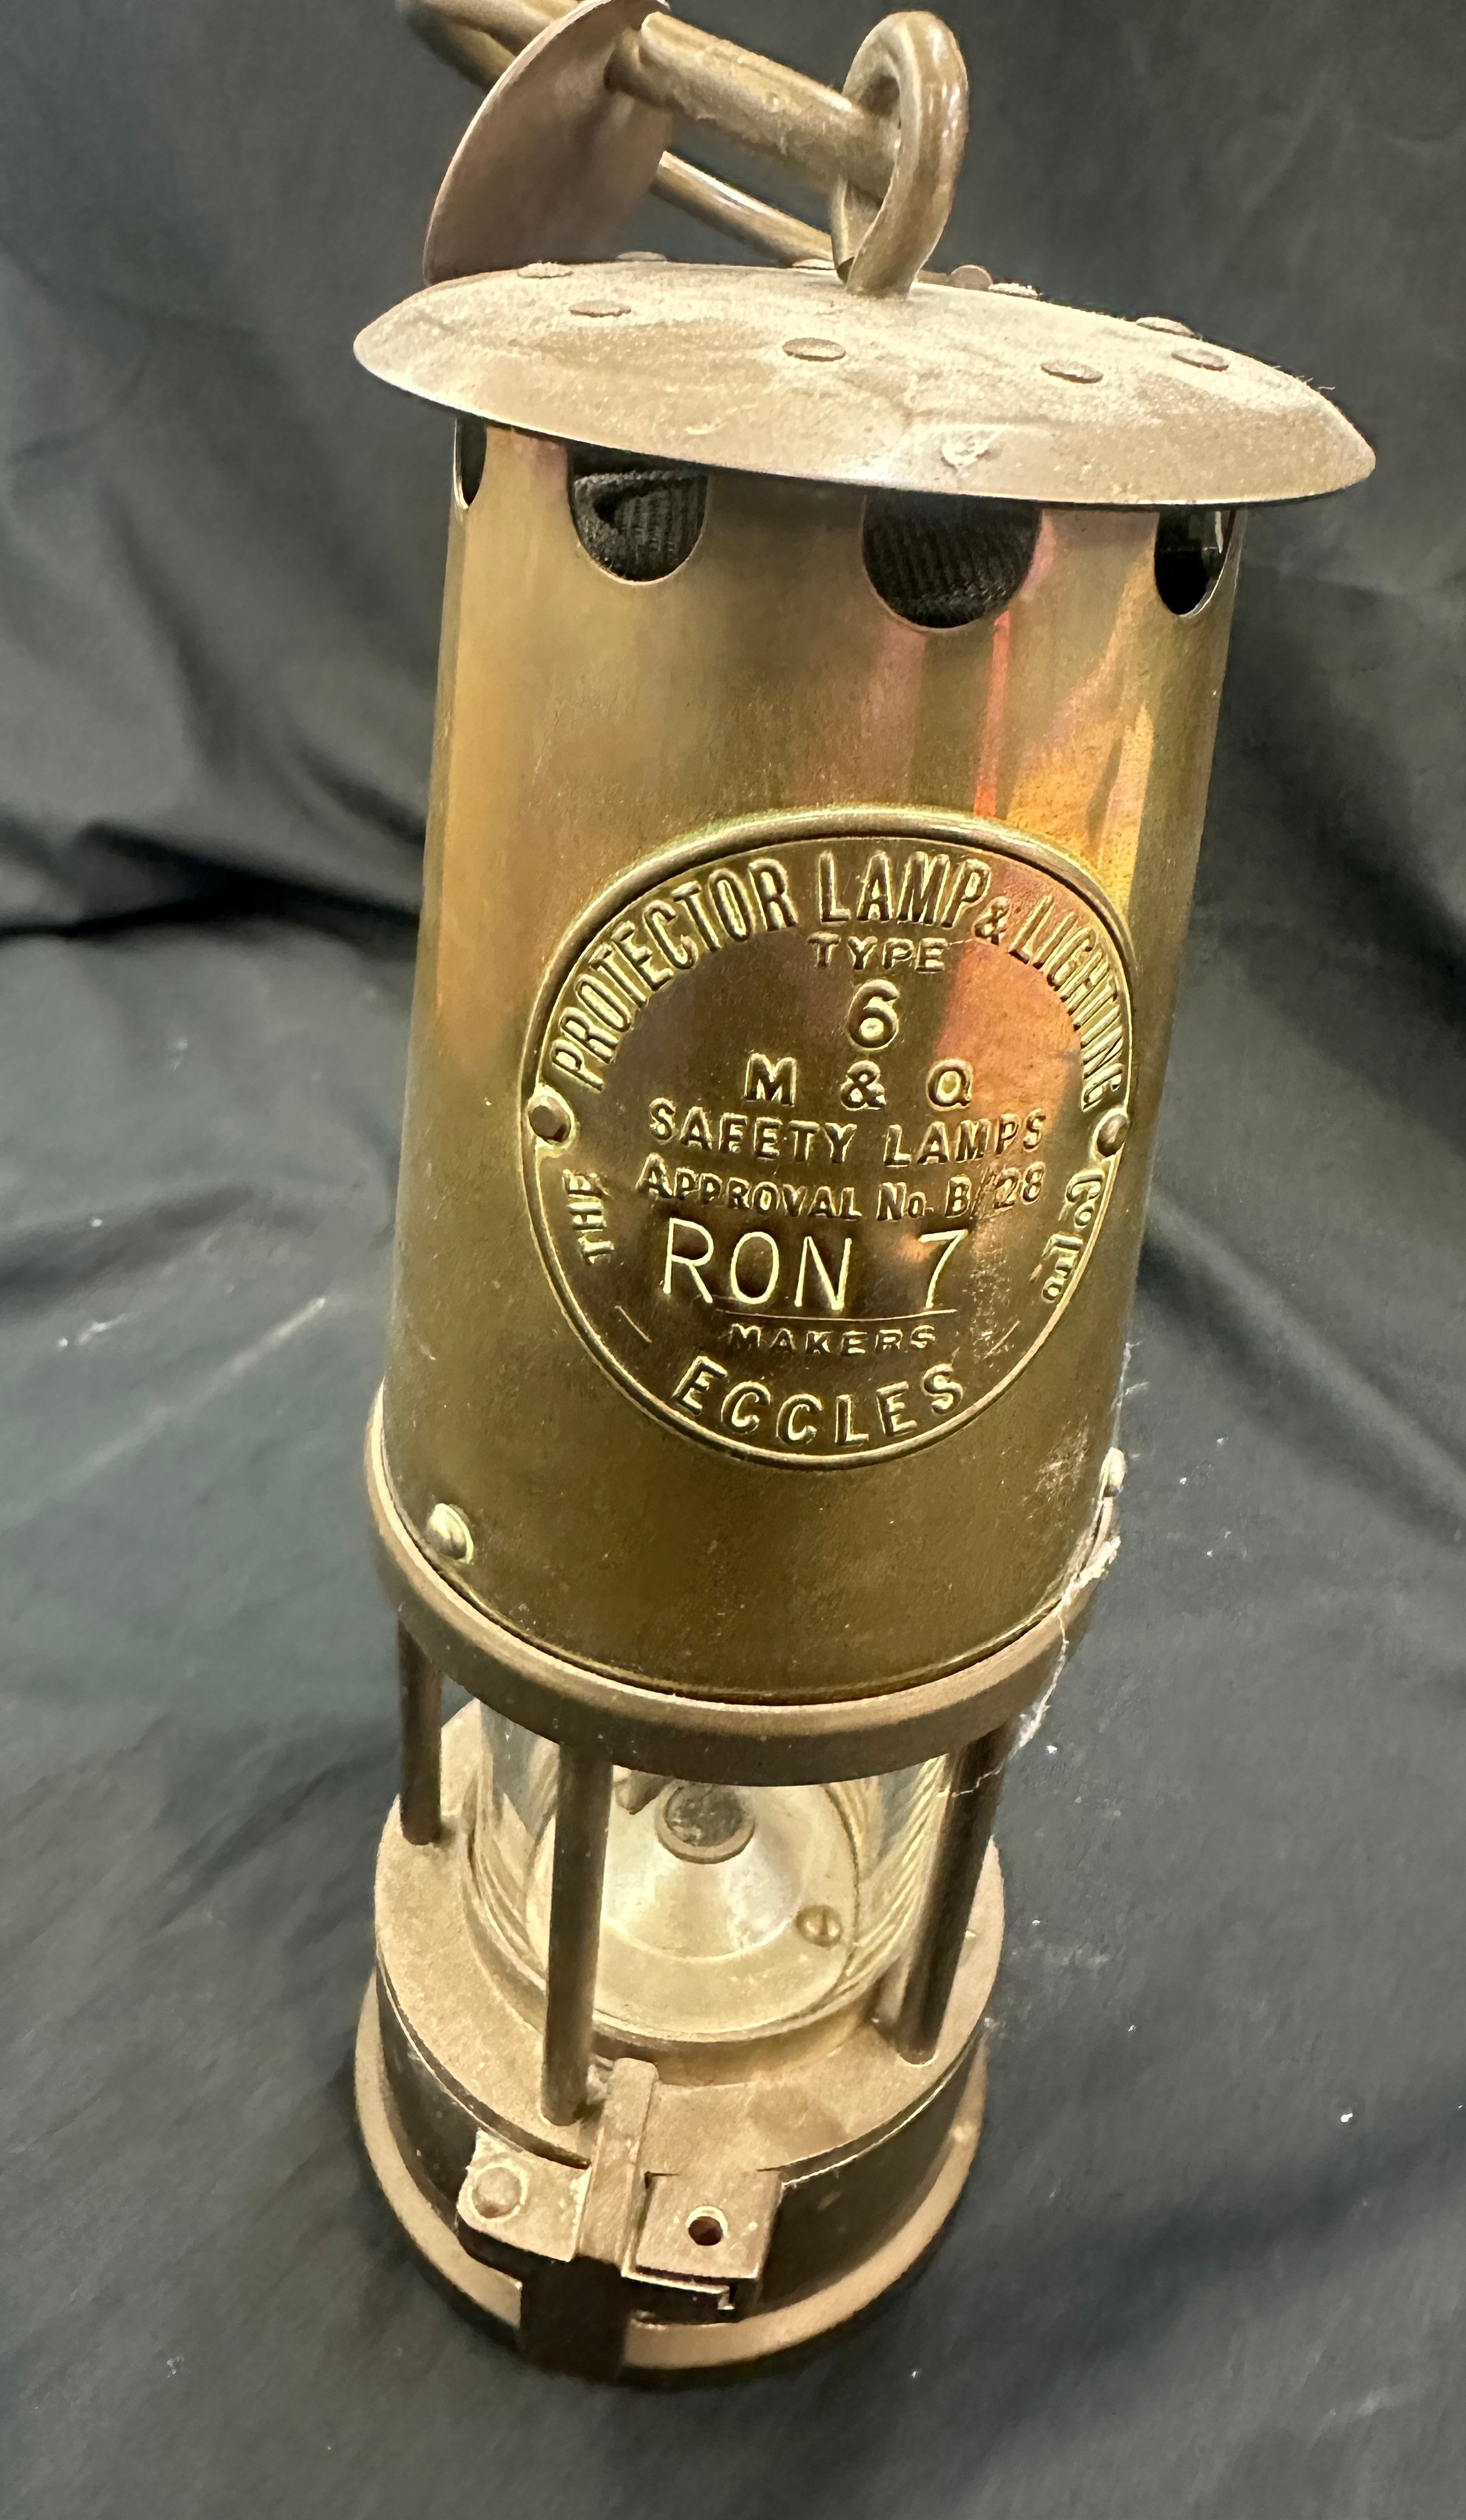 Vintage Eccles ron 7 minors lamp with tag - Image 4 of 4